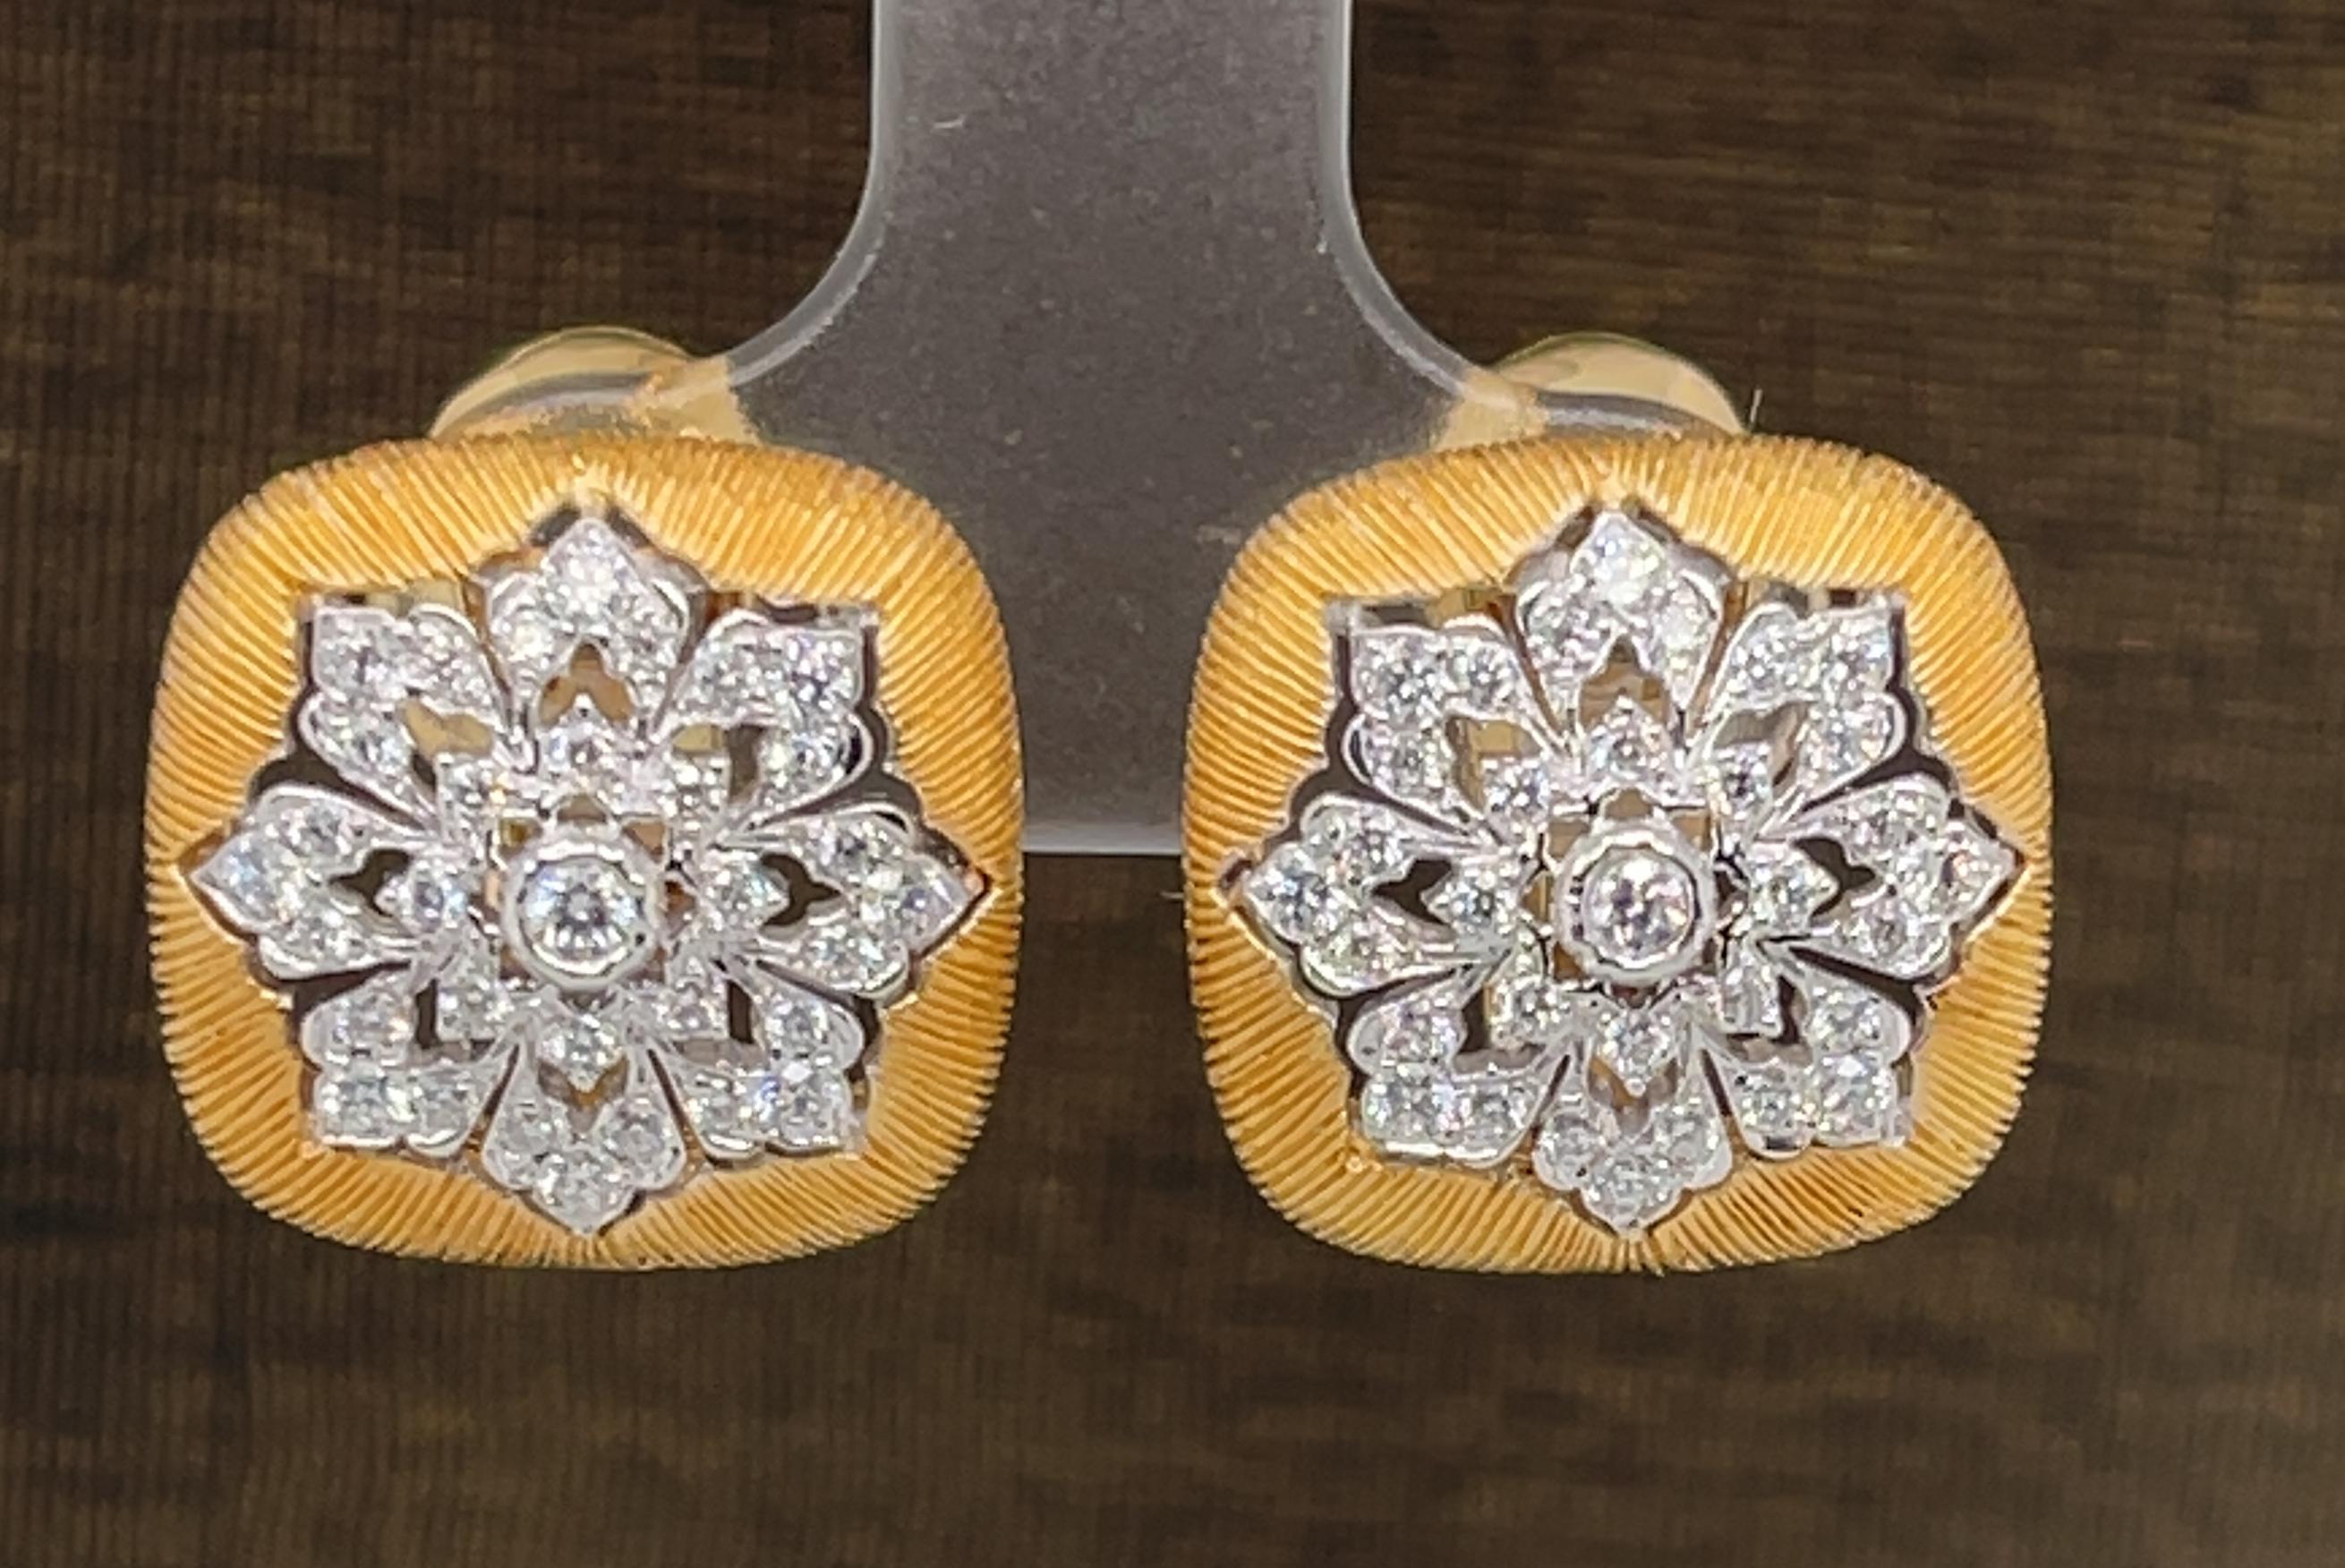 These Florentine inspired earrings feature bright, sparkling diamonds set in 18k white and yellow gold with French clip backs. Brilliant diamonds are set in a floral starburst against an exquisite hand-